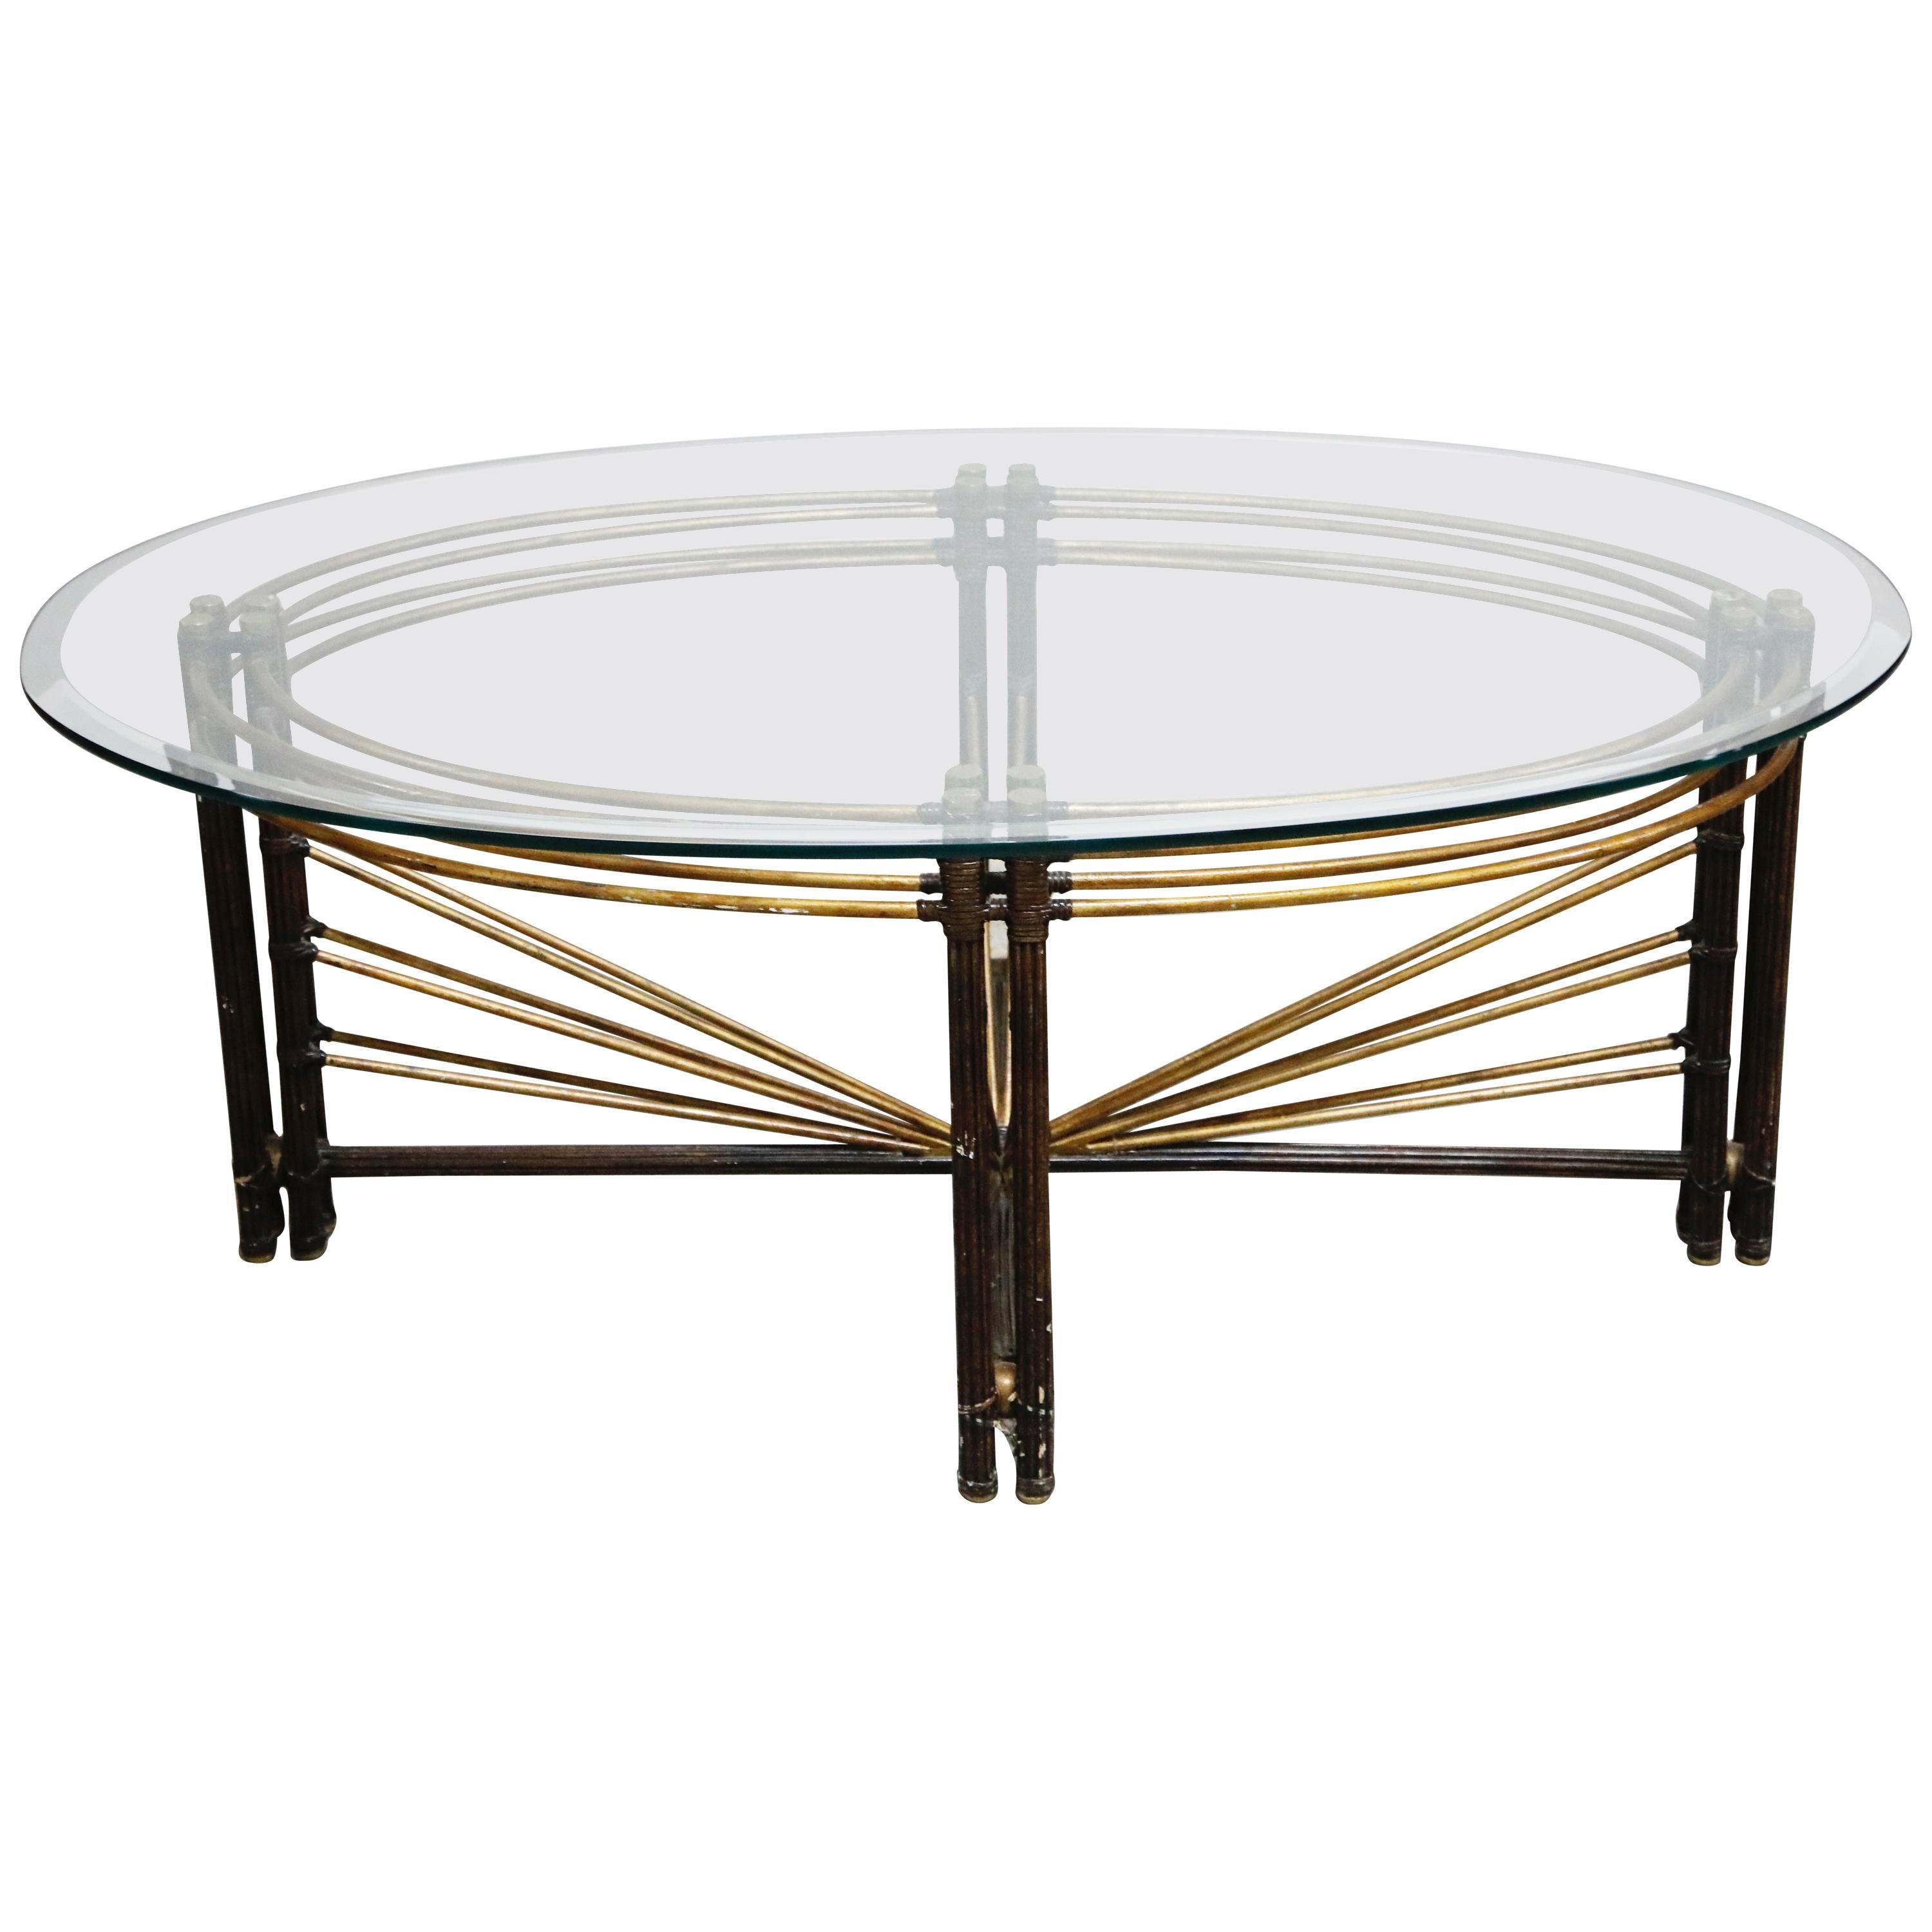 Brass and Steel Faux Bamboo Neoclassical Styled Coffee Table Manner of Jansen